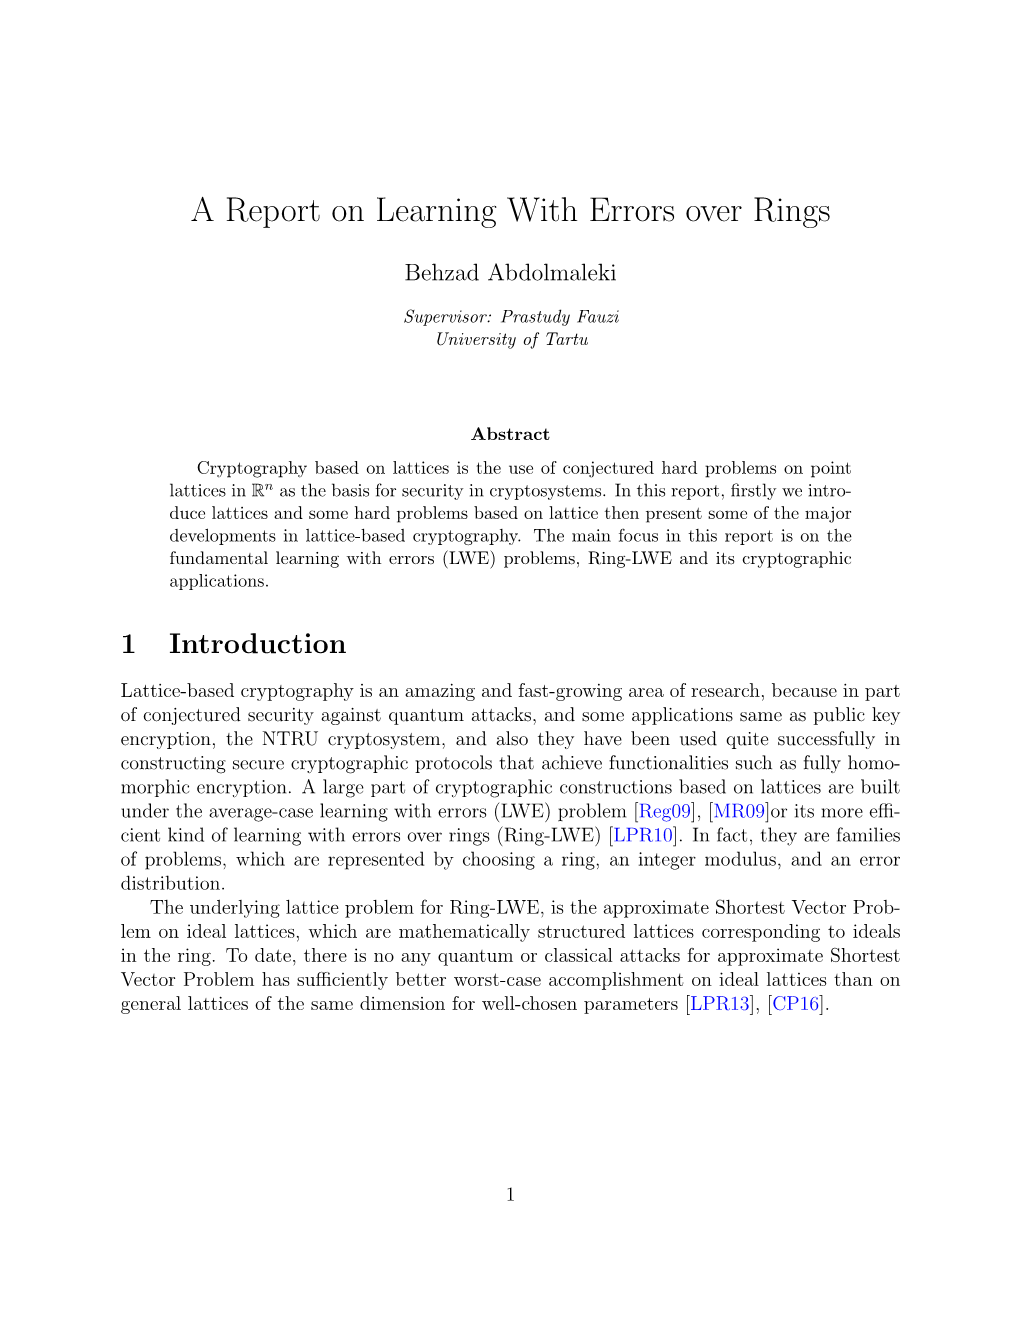 A Report on Learning with Errors Over Rings